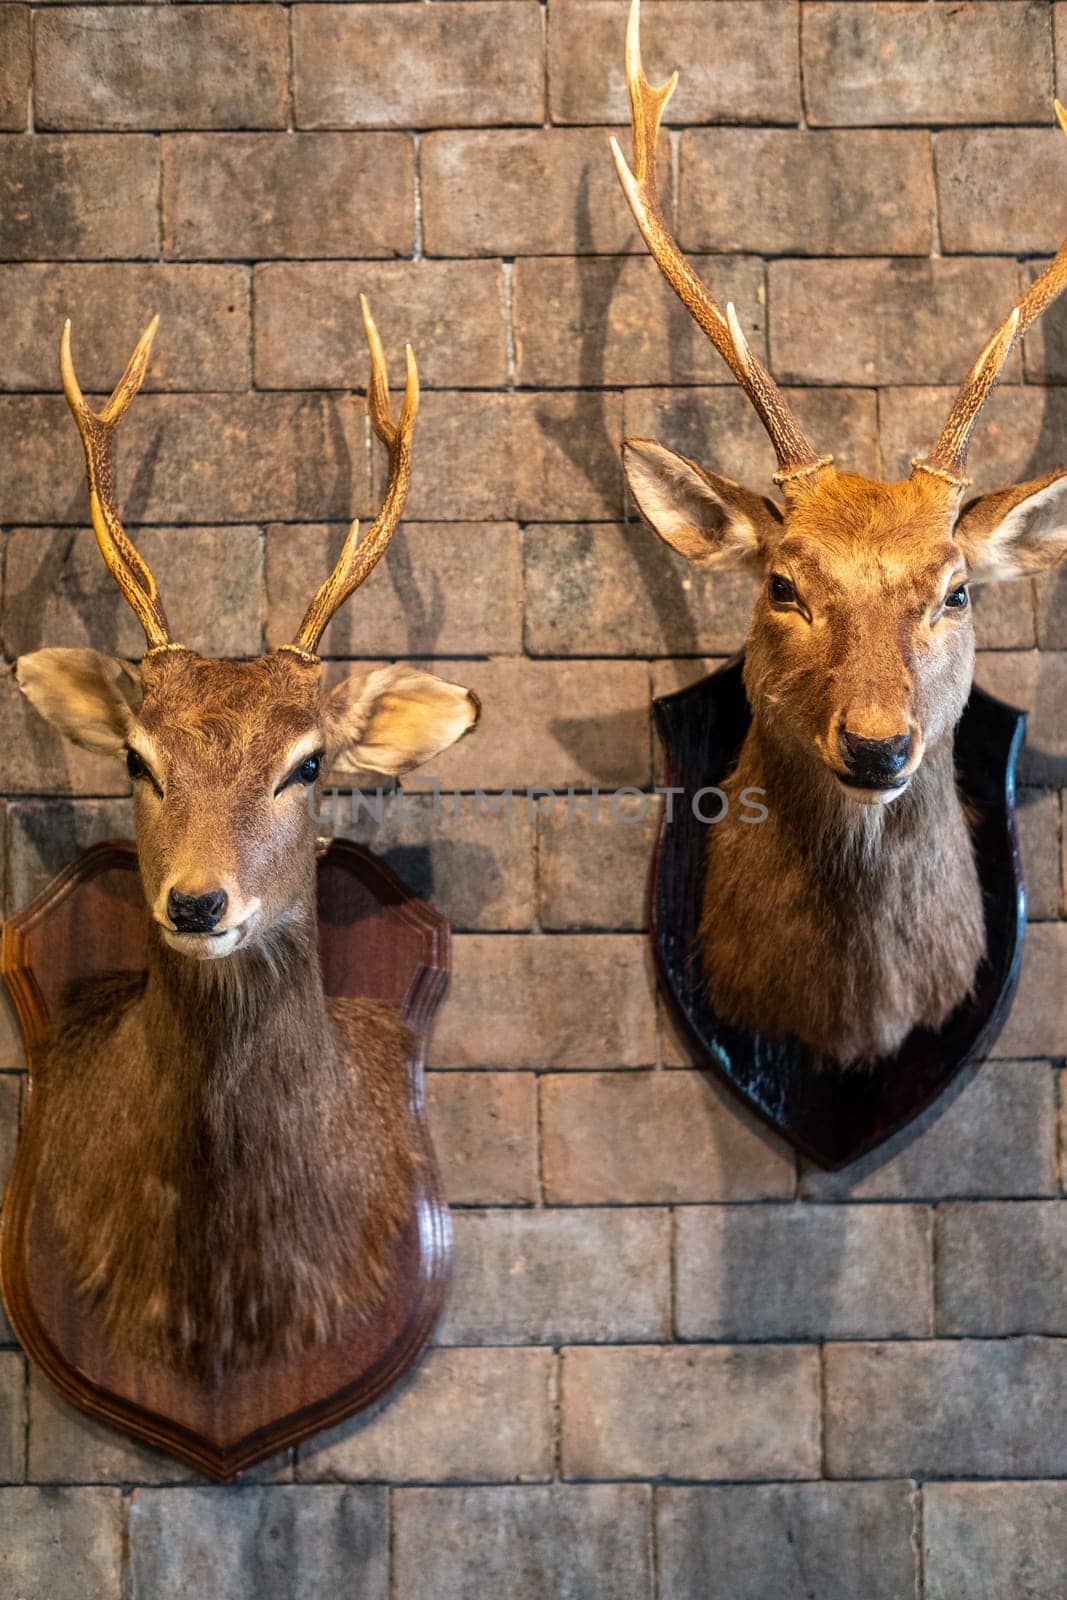 Head deer mount on the wall, 2 head, deer antlers attached to the wall by wuttichaicci